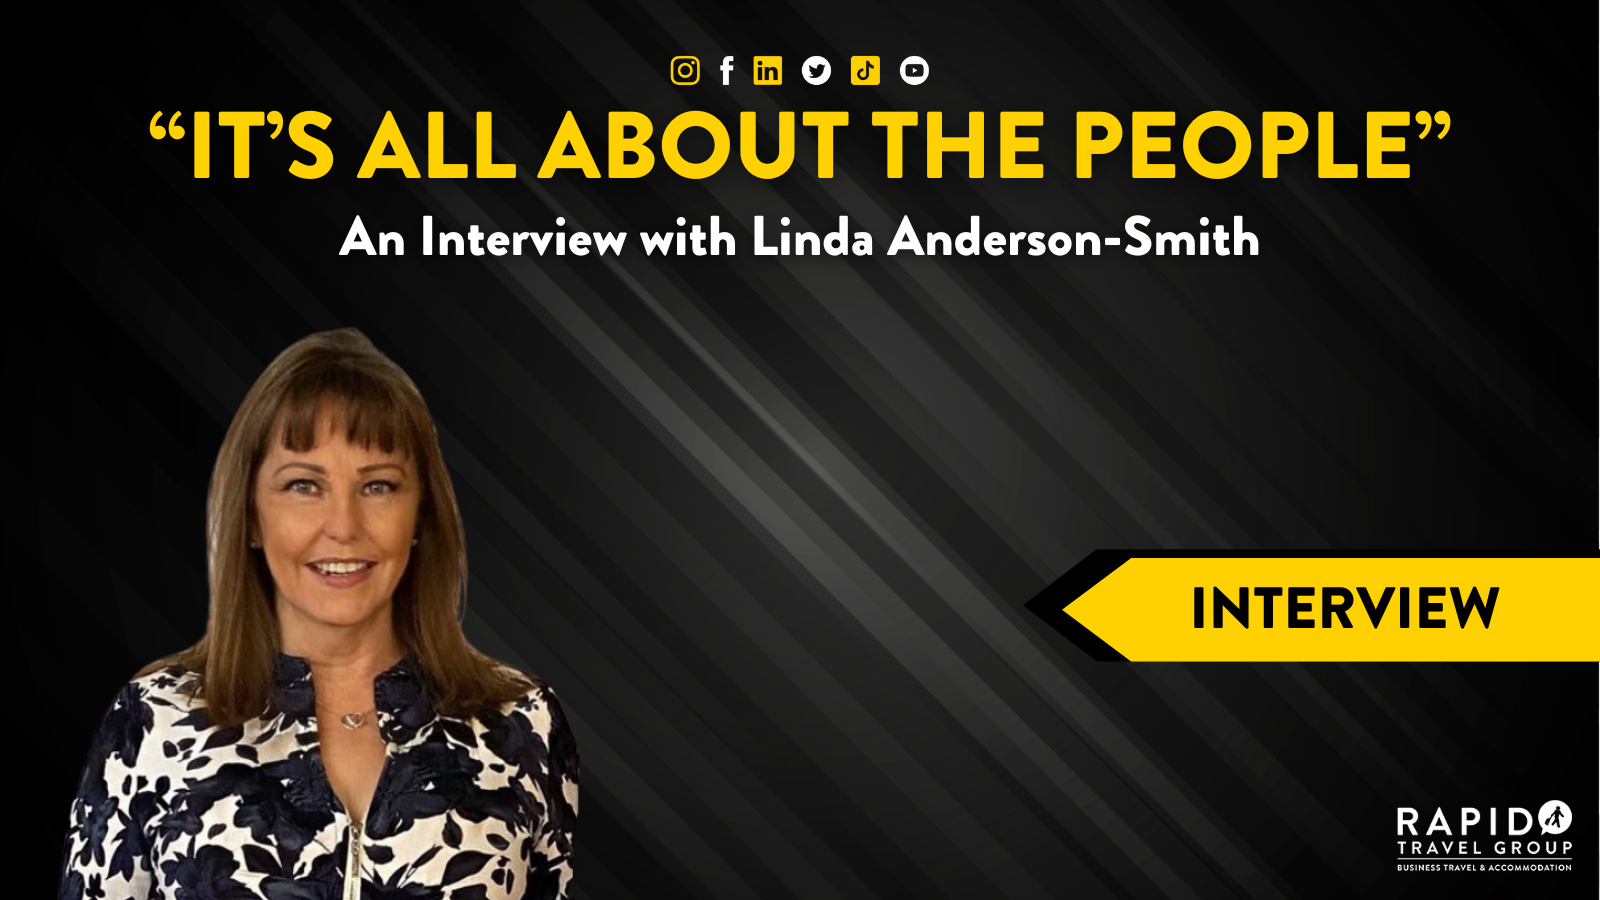 "It's all about the people": an interview with Linda Anderson-Hall